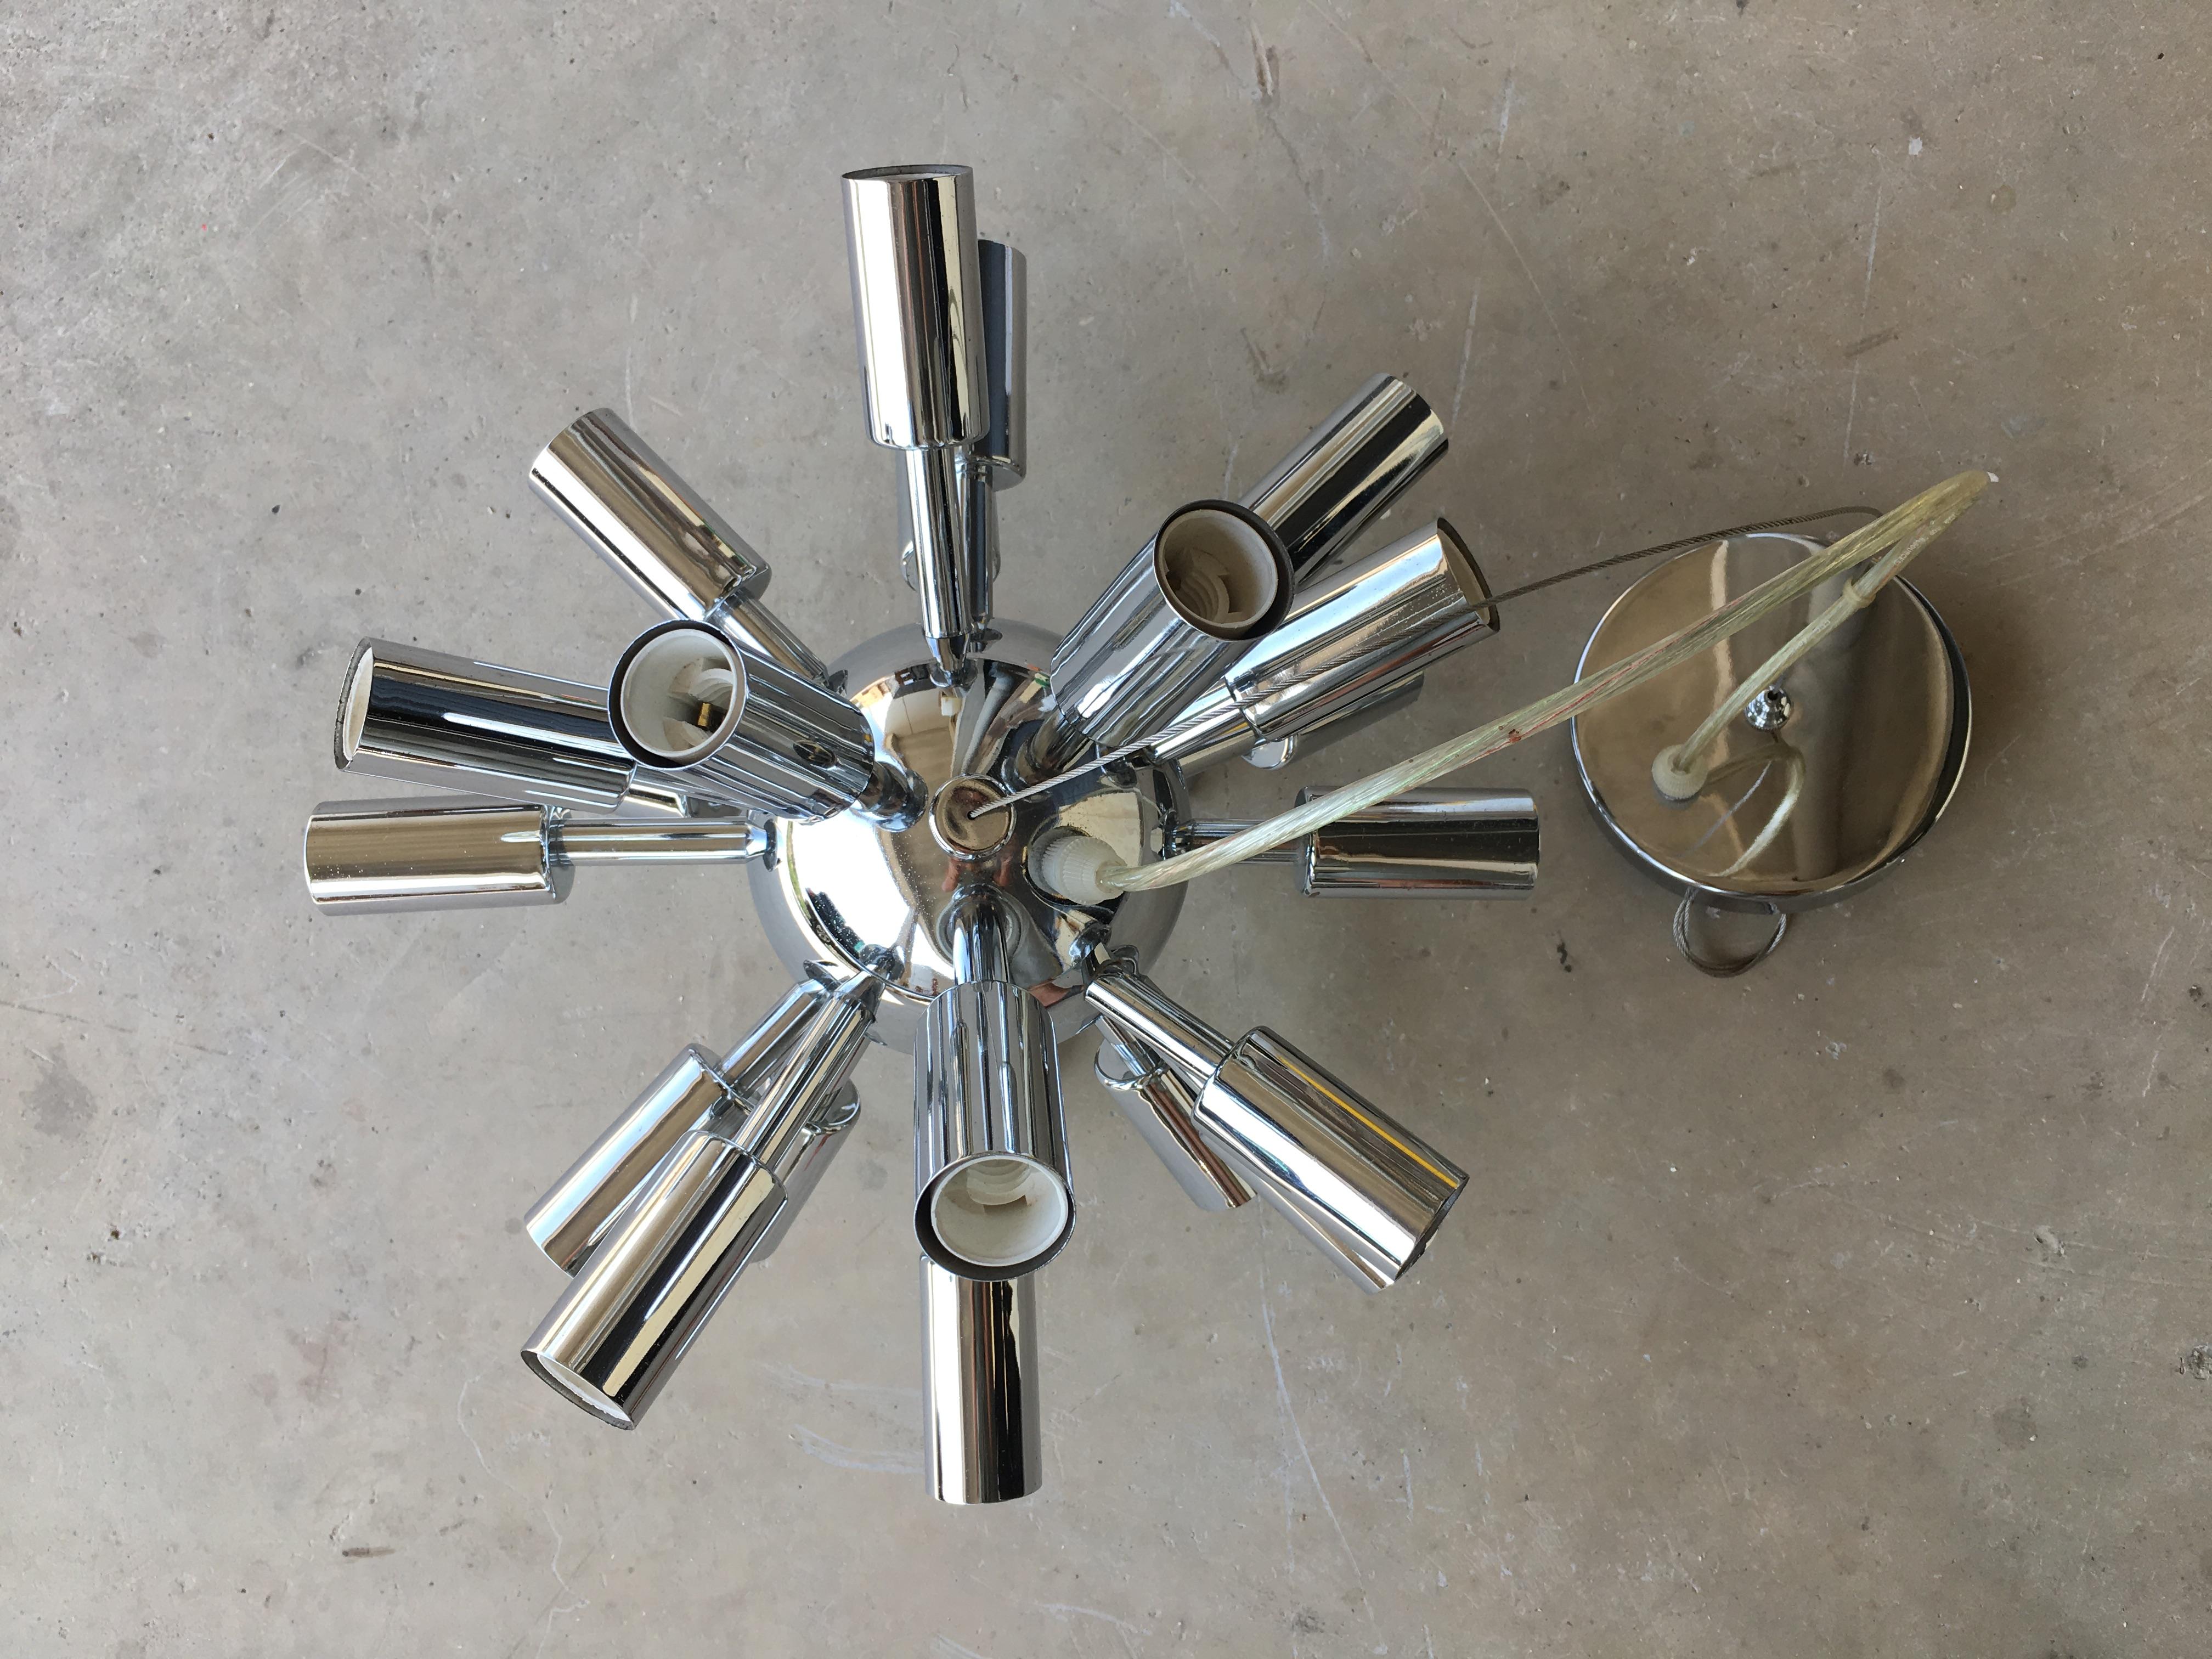 Midcentury Sputnik Chandelier Light Fixture in Polished Chrome, 1960s In Excellent Condition For Sale In Miami, FL